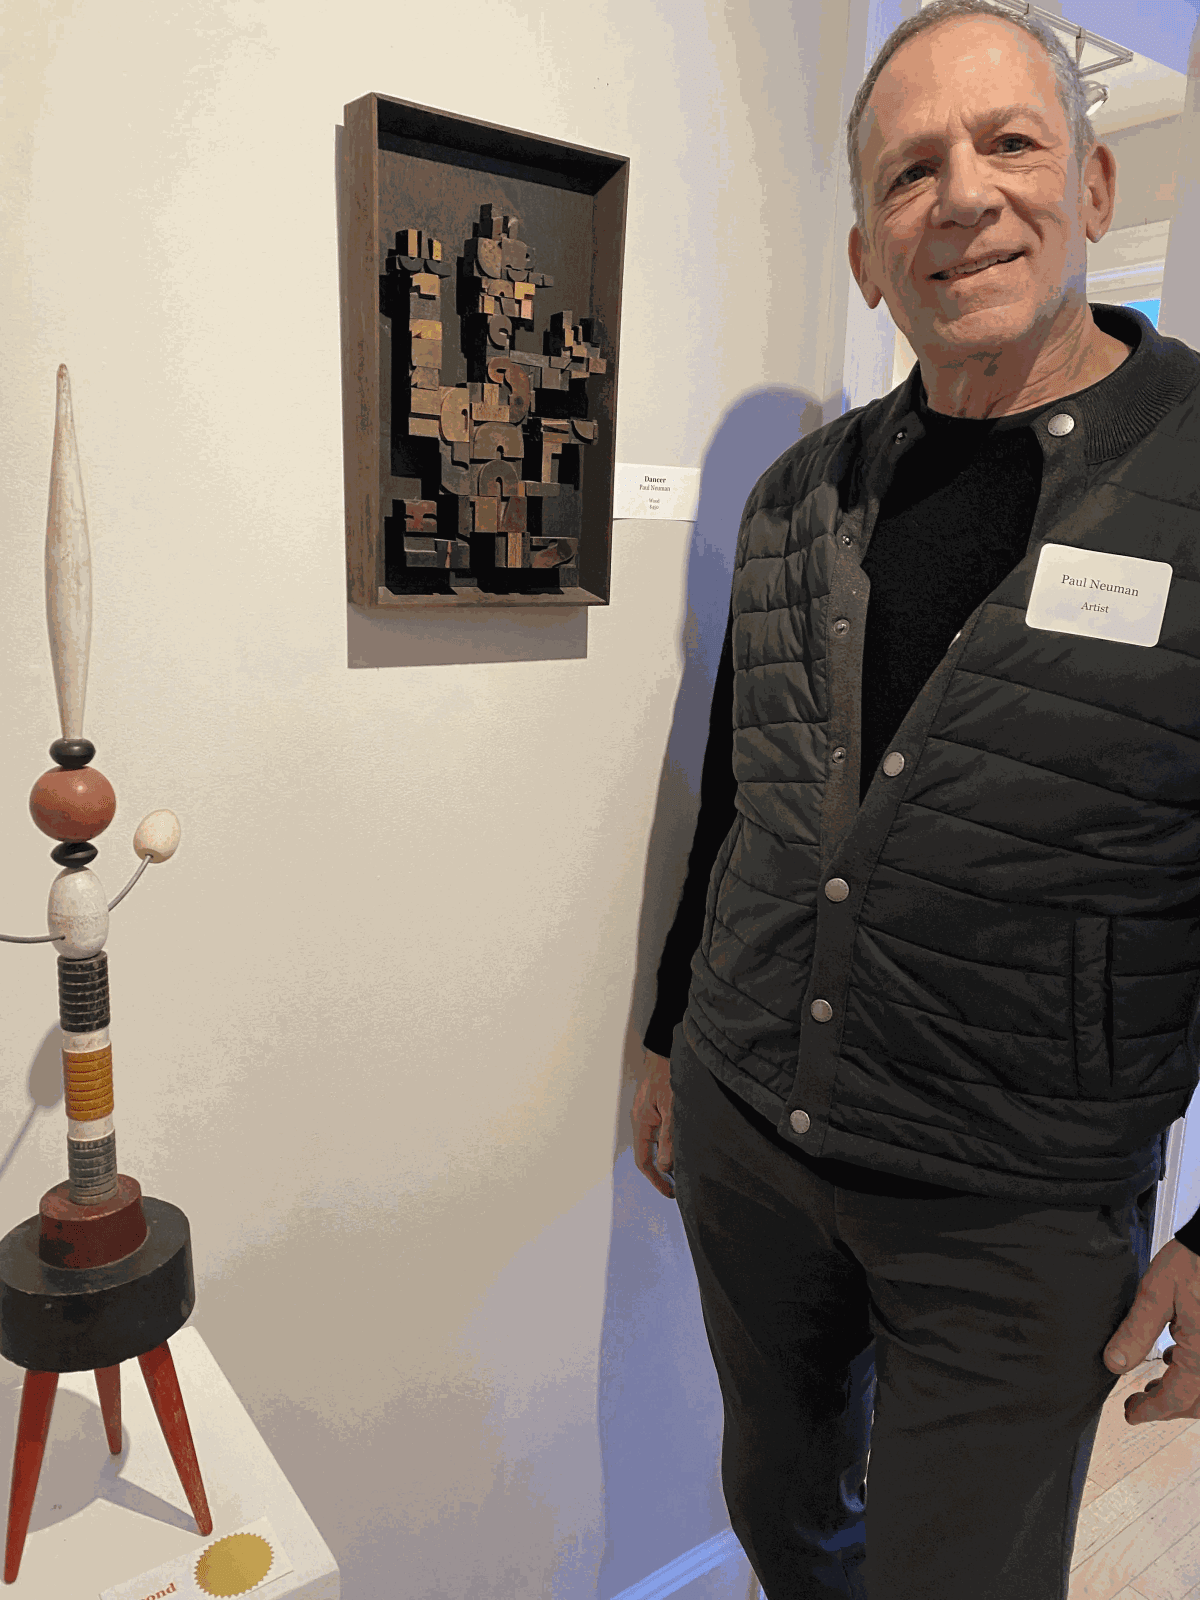 Paul Neuman standing in front of two of his artworks, two sculptures in which one is wall mounted.